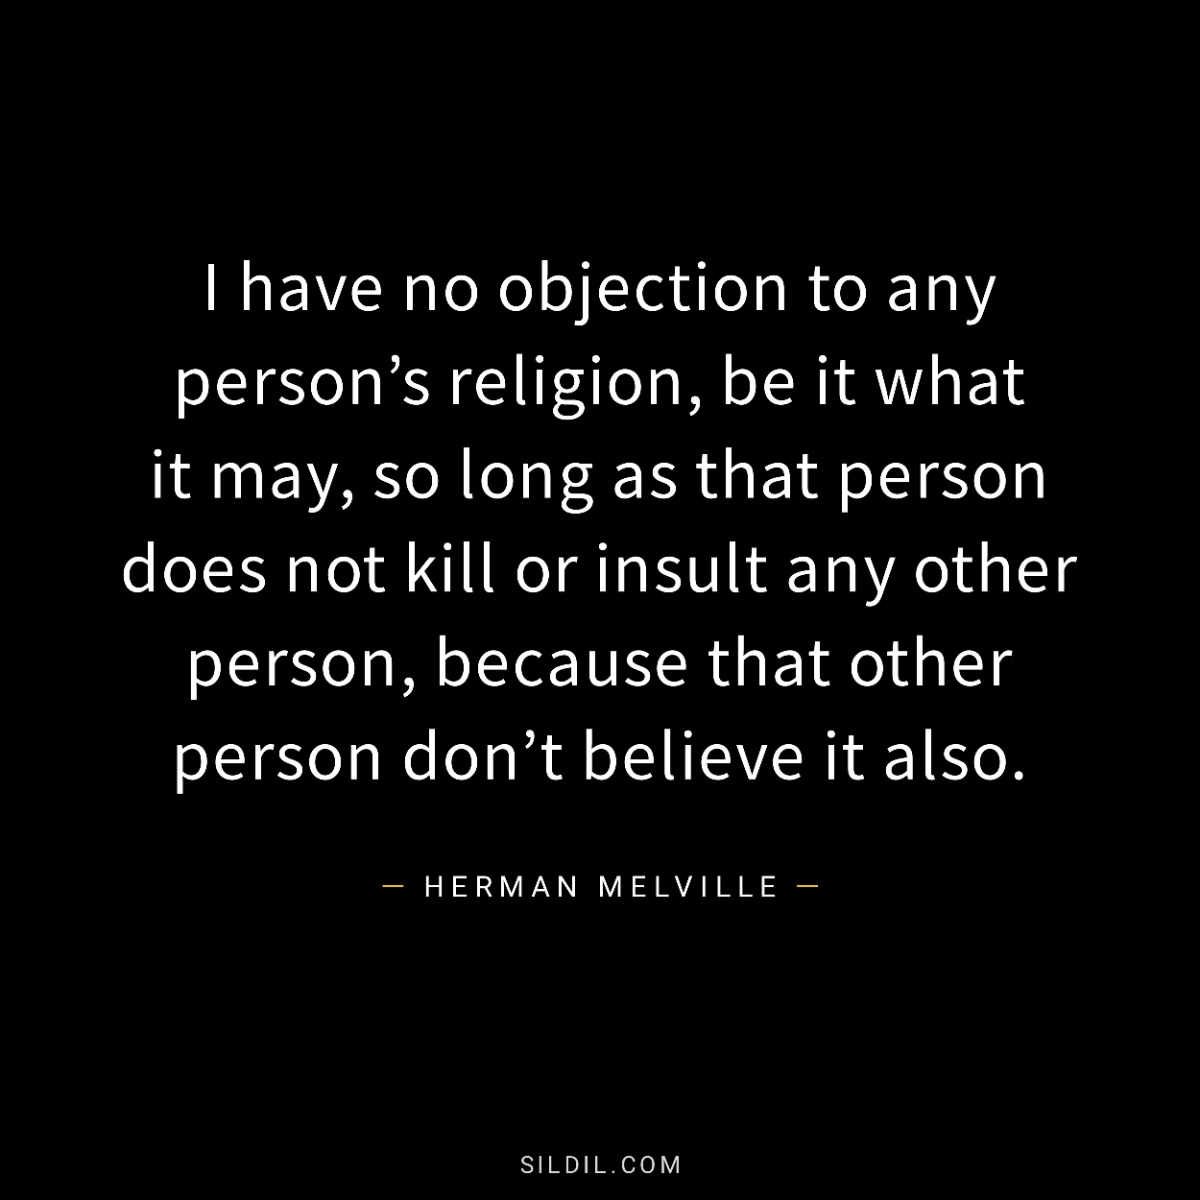 I have no objection to any person’s religion, be it what it may, so long as that person does not kill or insult any other person, because that other person don’t believe it also.